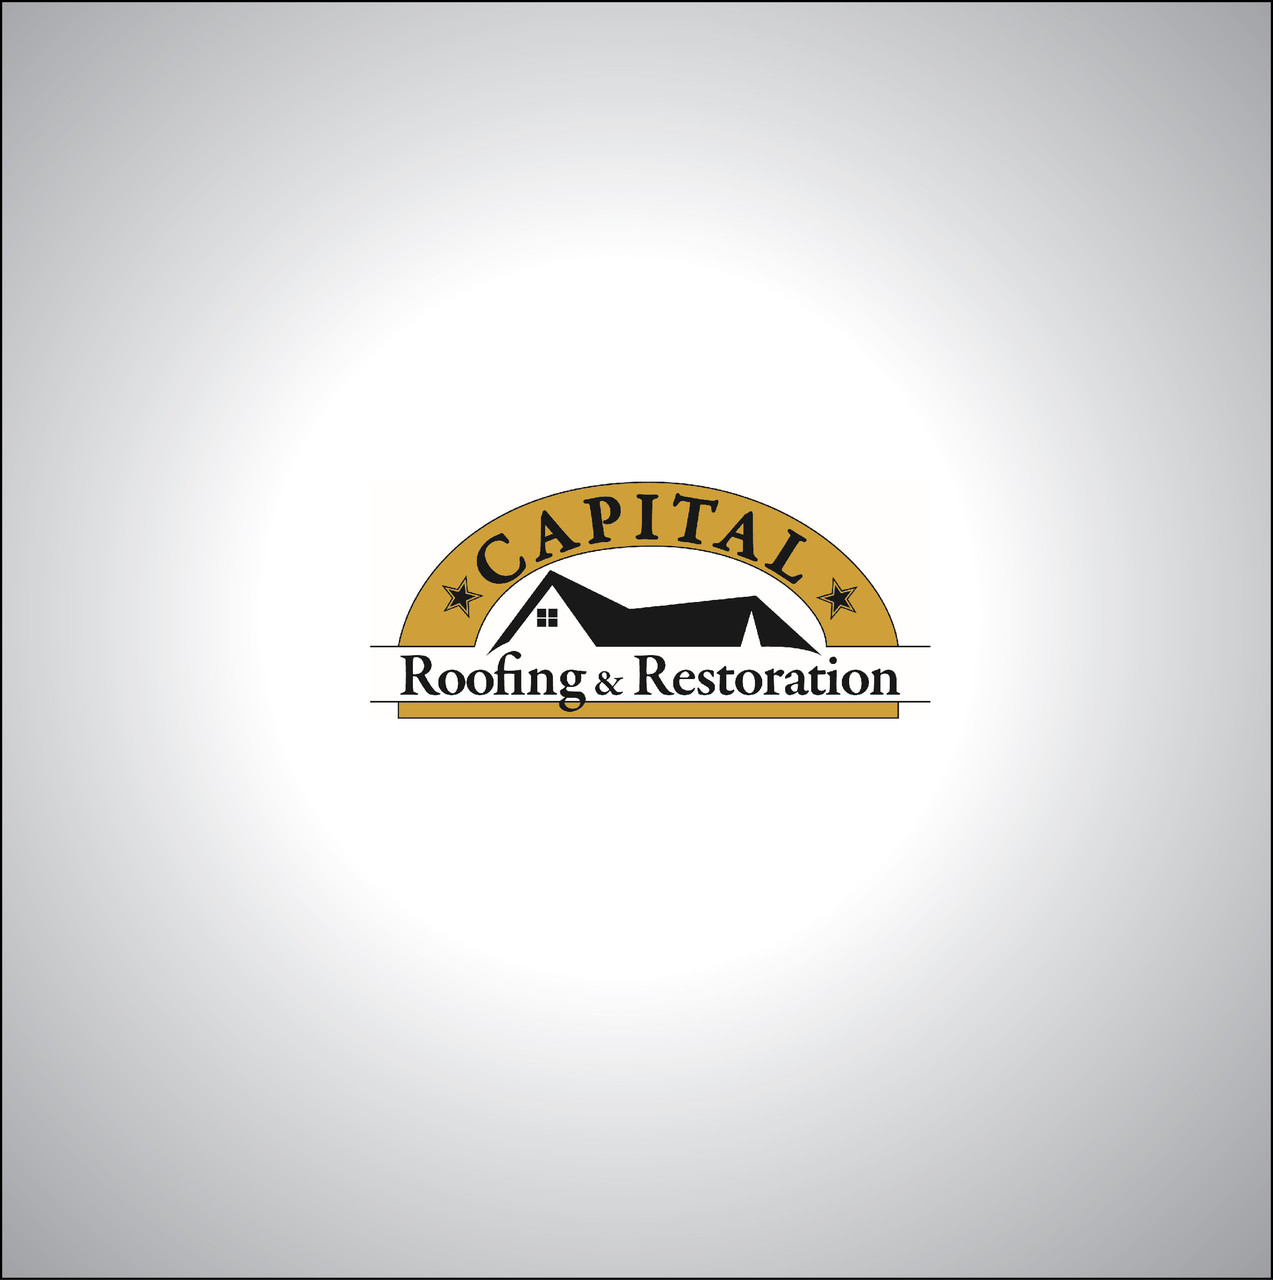 Logo and Branding/publications for Capital Roofing